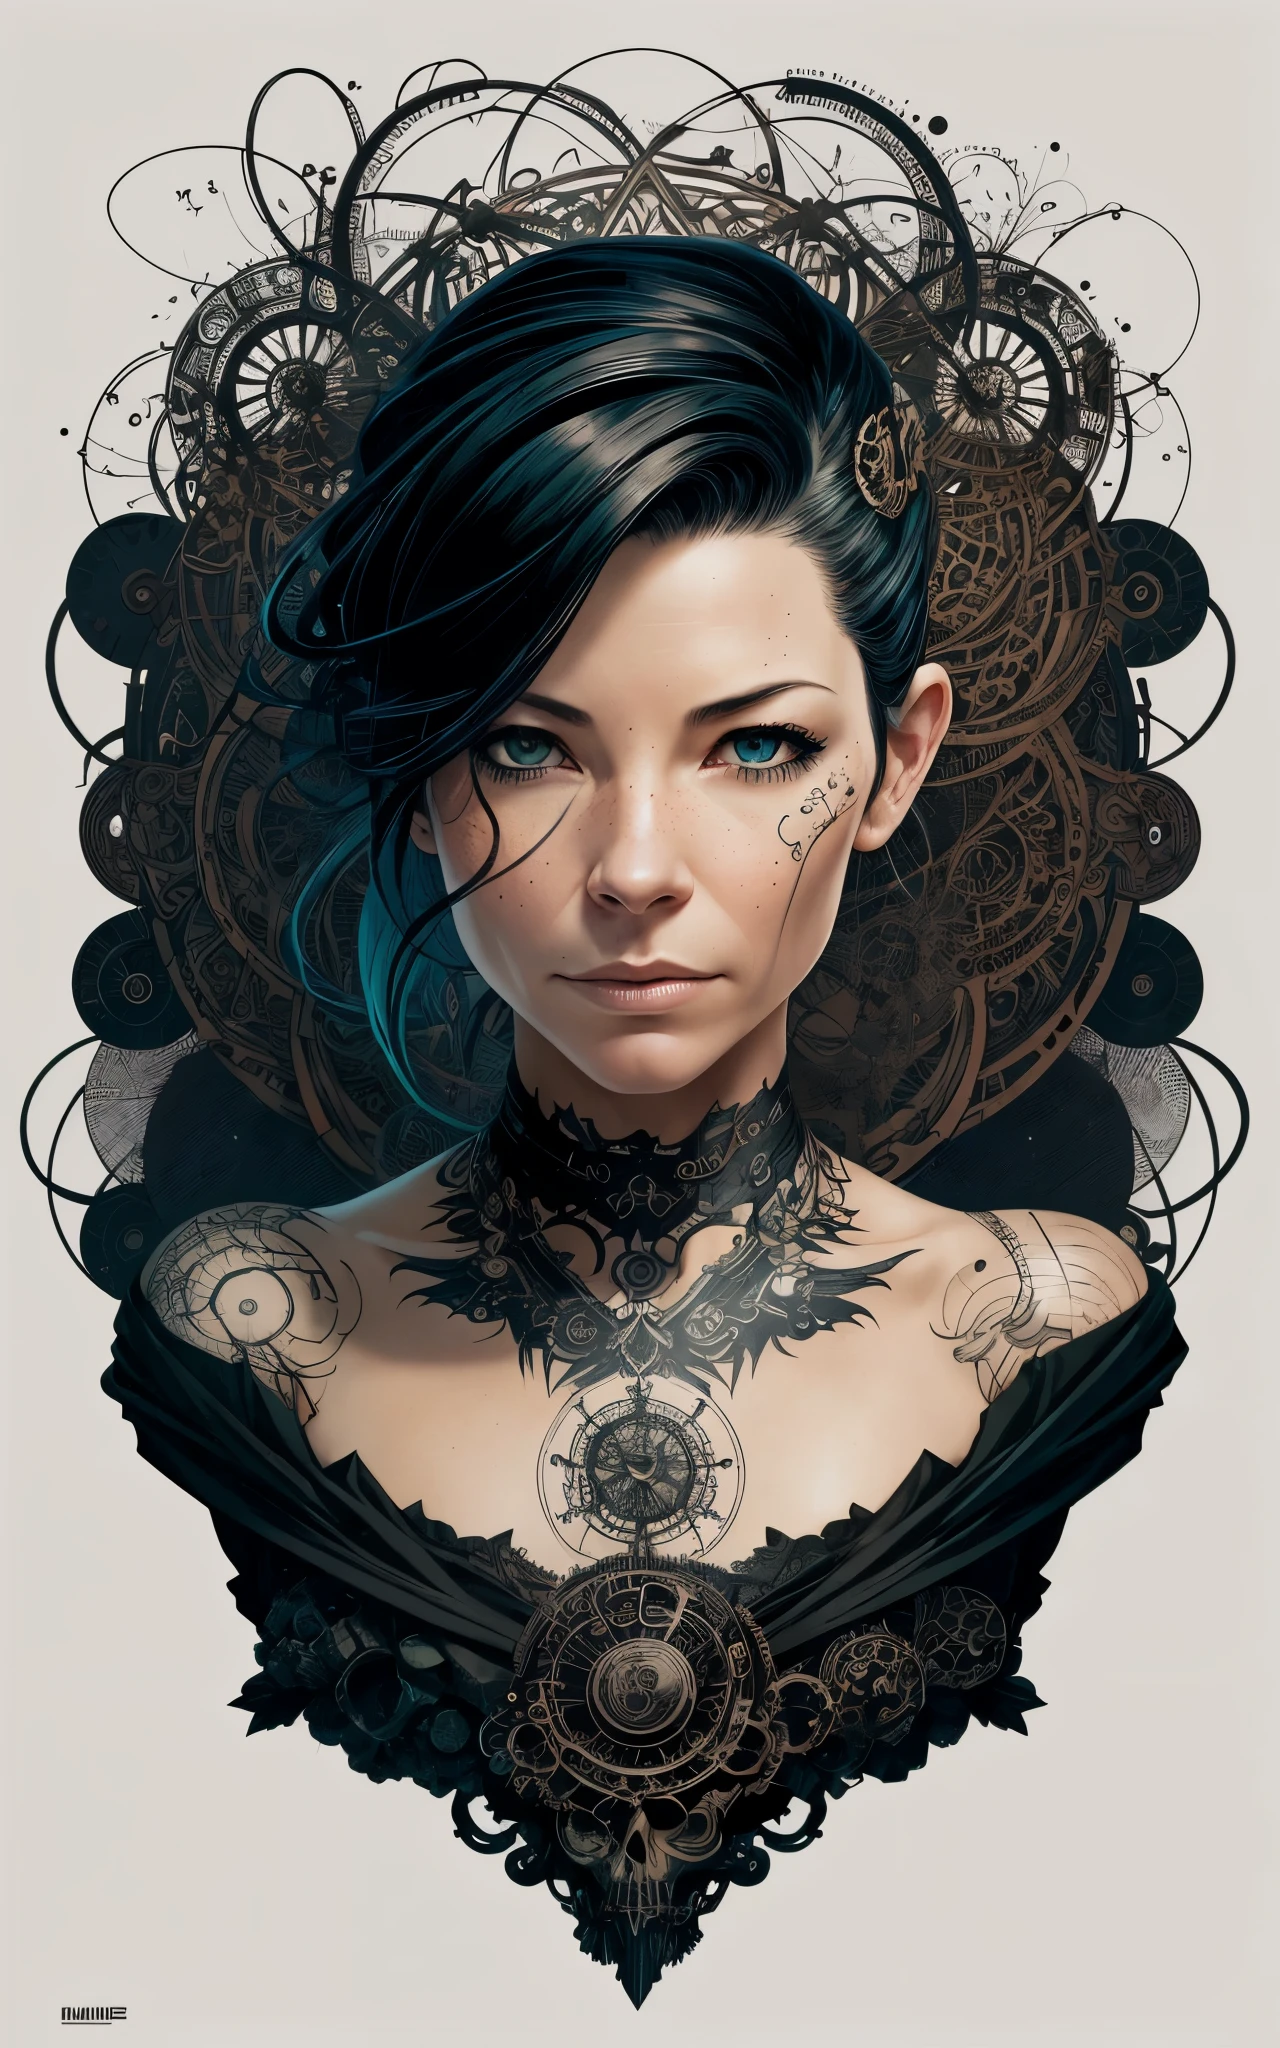 (Evangeline Lilly) is a beautiful charming woman carved out of dark smoke, dressed as a Steampunk girl in black, circular colored smoke, waves of shadows at night, abstract skull ornaments, pixie back fade haircut, soft colors, flat 4d street art in the style of adrian ghenie, esao andrews, jenny saville , edward hopper, surrealism, james jean dark, takato yamamoto, inkpunk minimalism, , detailed symmetrical brown eyes with circular iris, seamless geometric pattern harmony, luminogram, iron gall ink, art by Russ Mills, Sakimichan,, by GIlSam -paio octane rendering depicting innovation and truth, 8k, by Lee Jeffries, depth - Gs studio